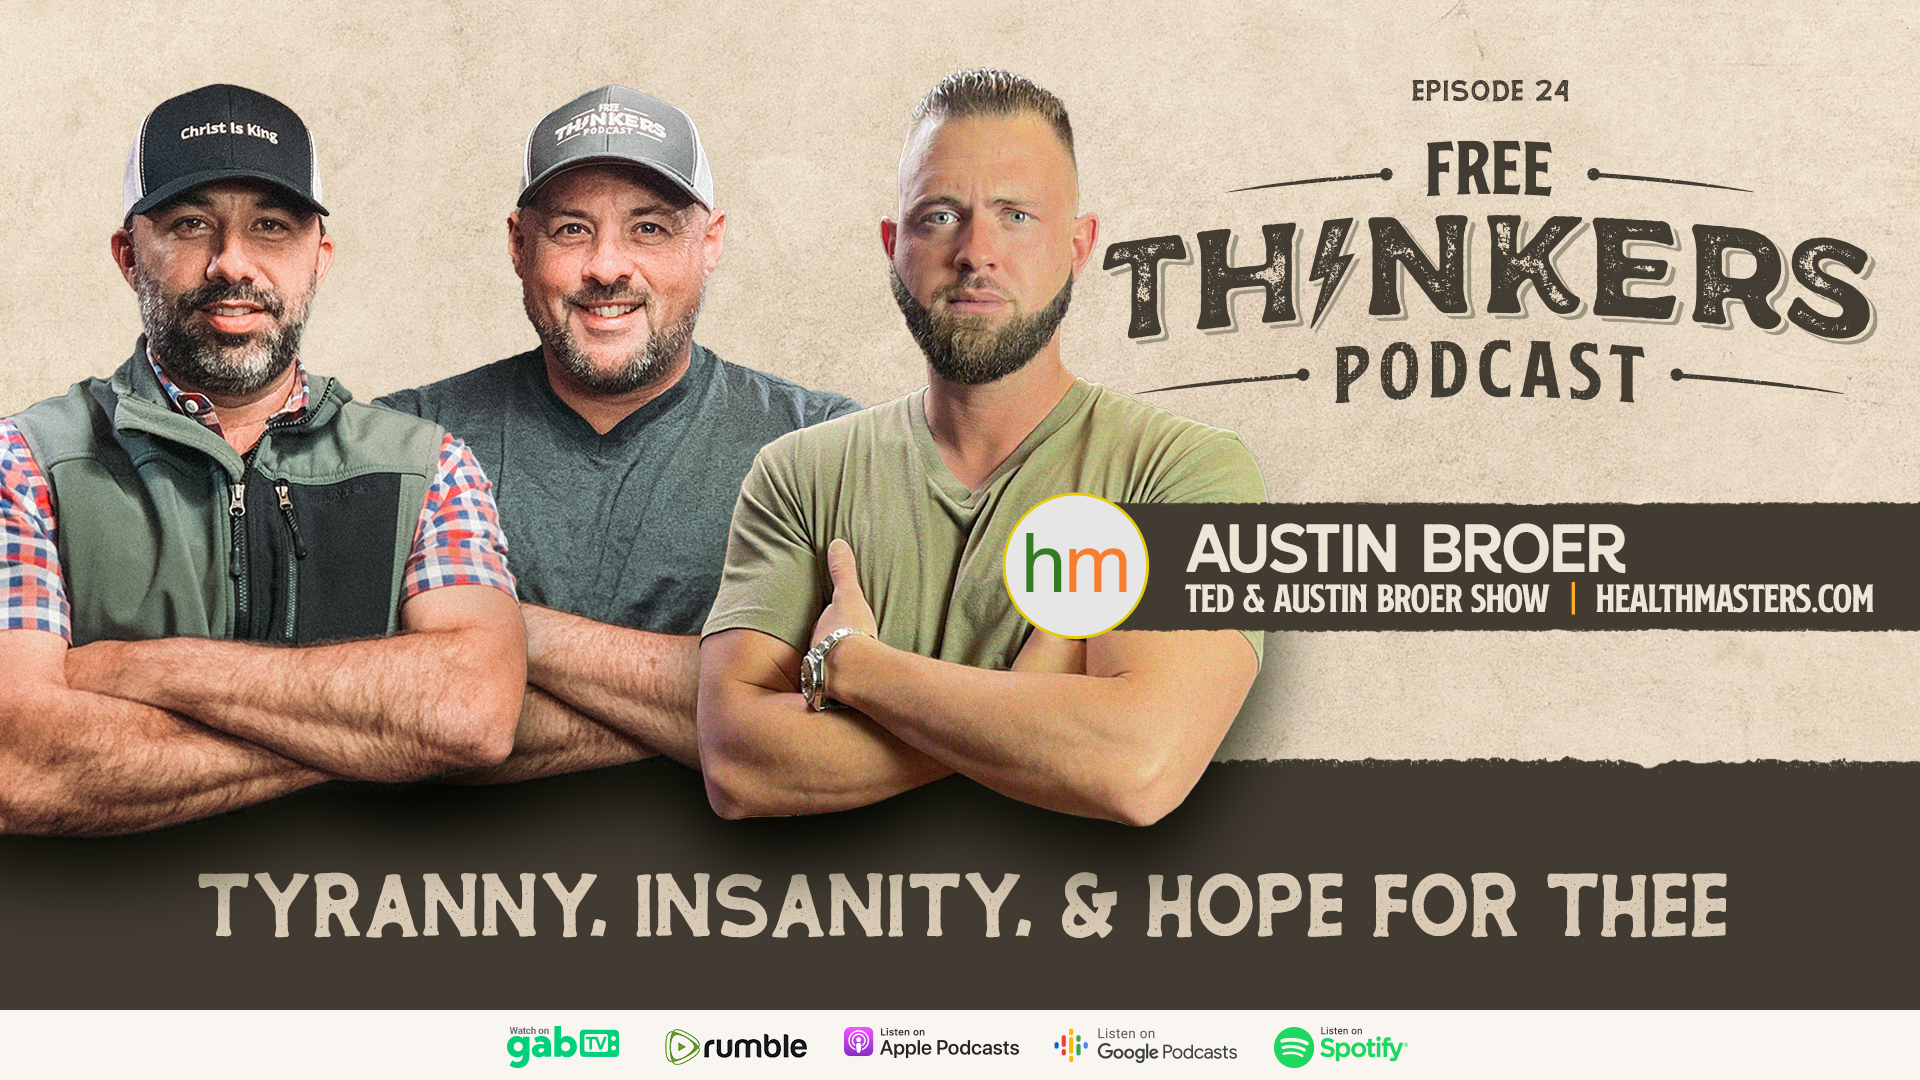 Free Thinkers Podcast with Austin Broer